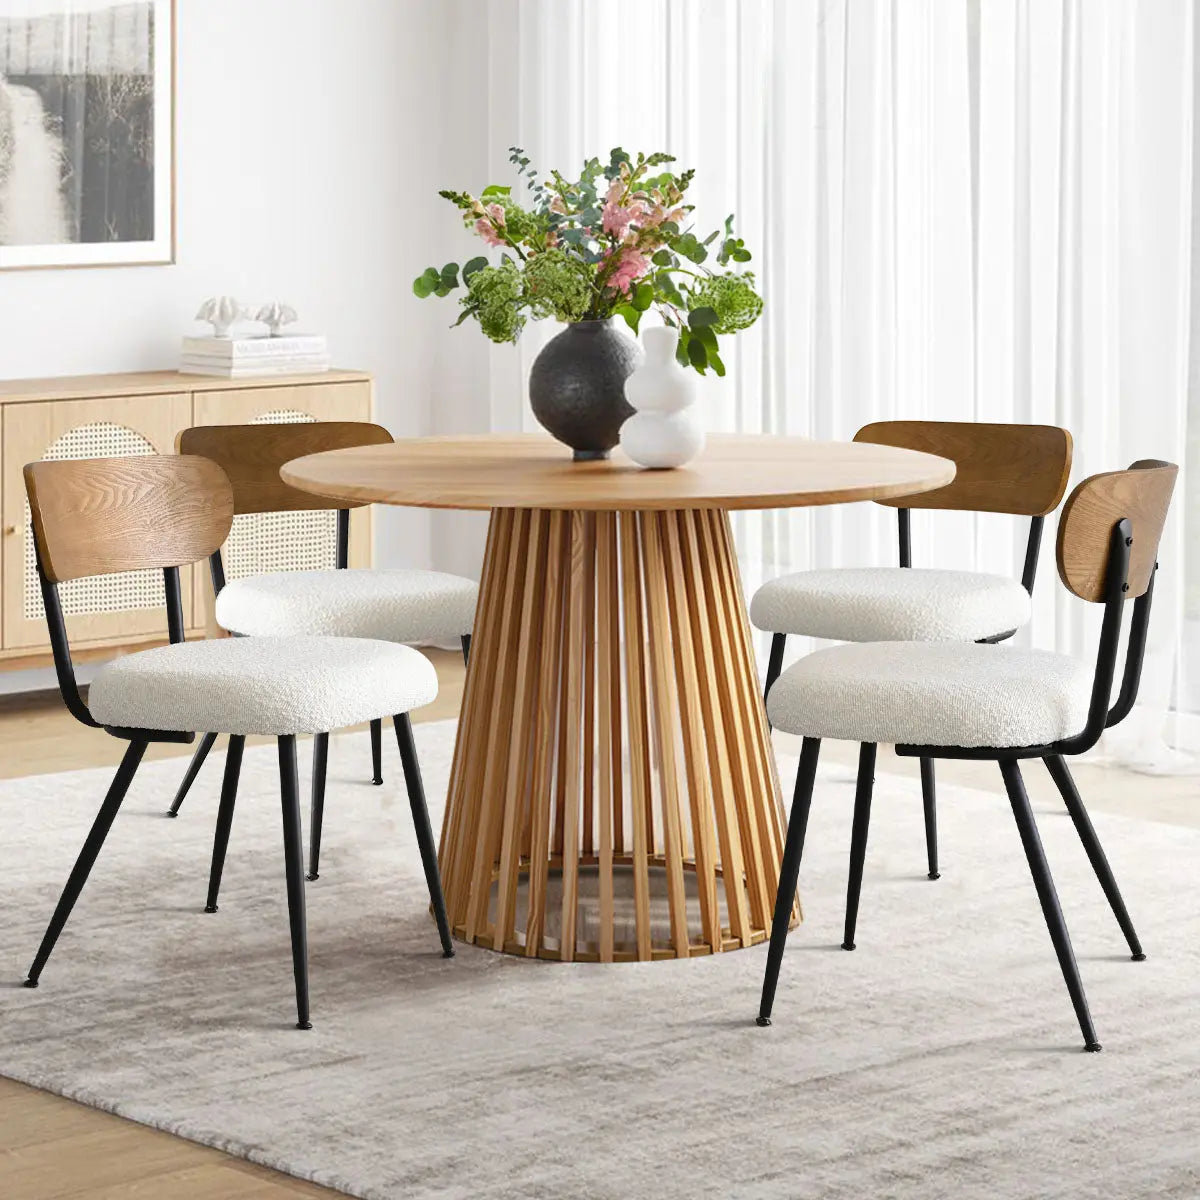 Skagen Boucle Dining Chair with Ash Back, Dining Chair Set of 4 - The Pop Maison